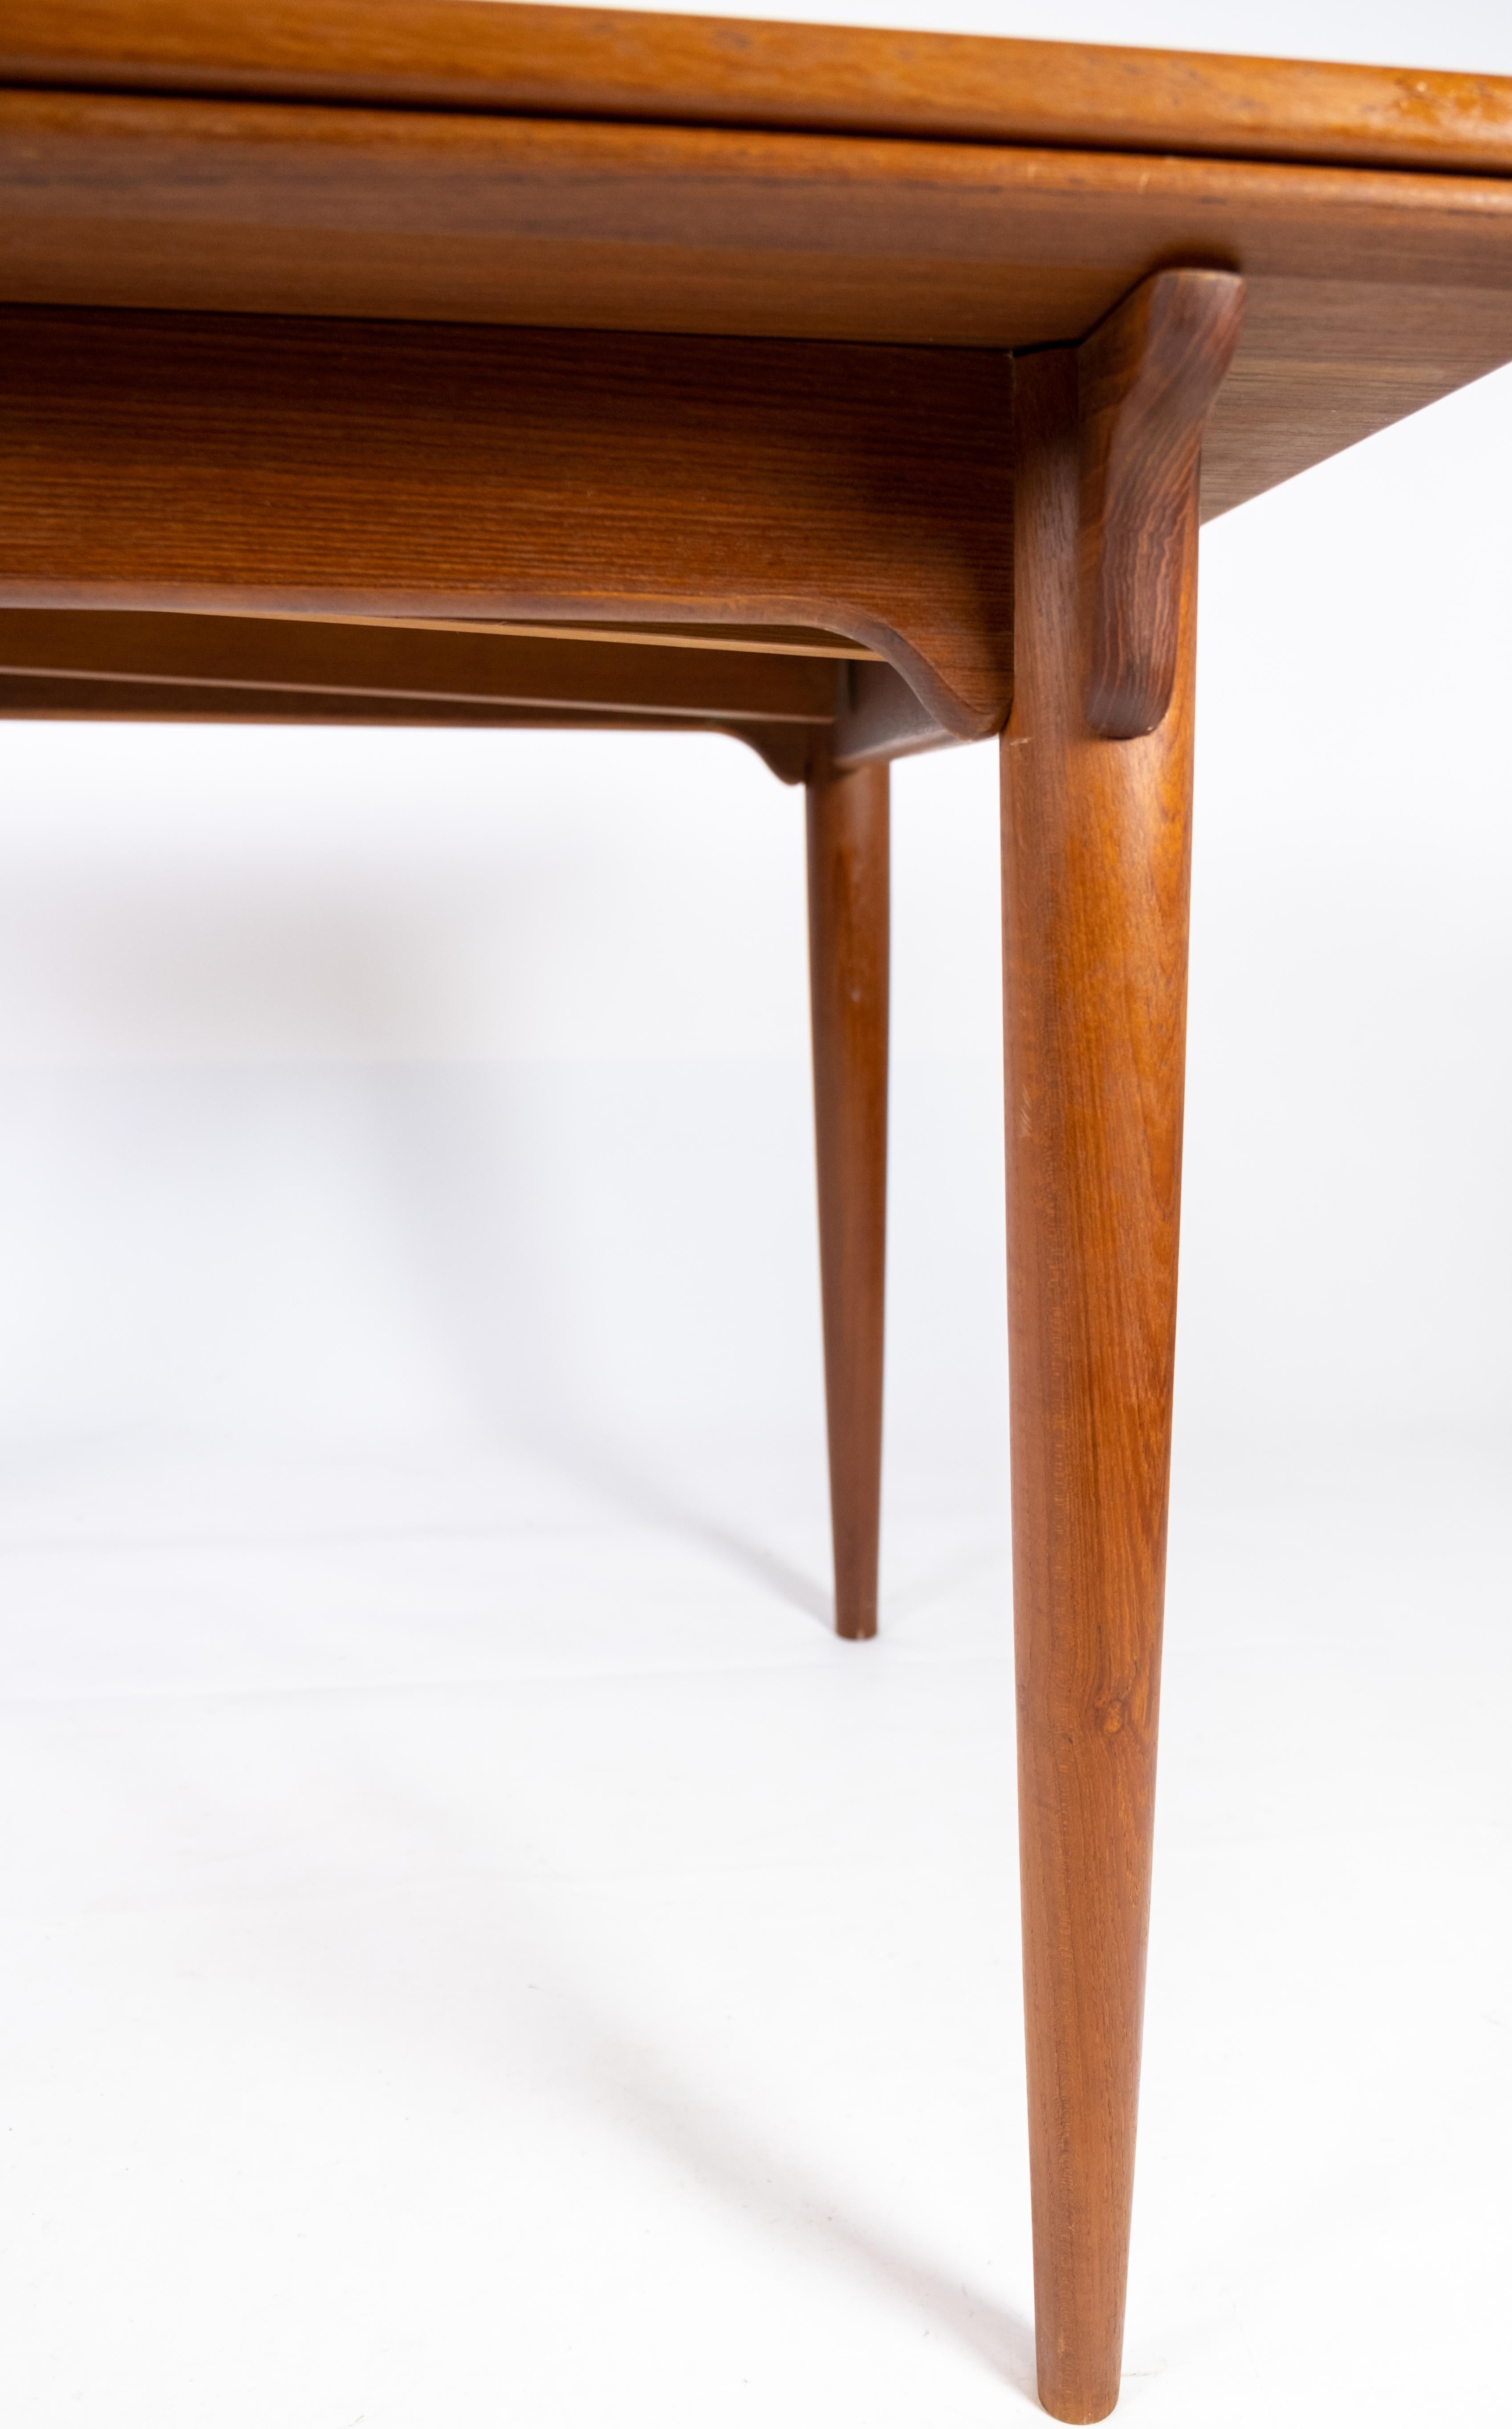 Dining Table Made In Teak With Extentions, Danish Design From 1960s For Sale 2